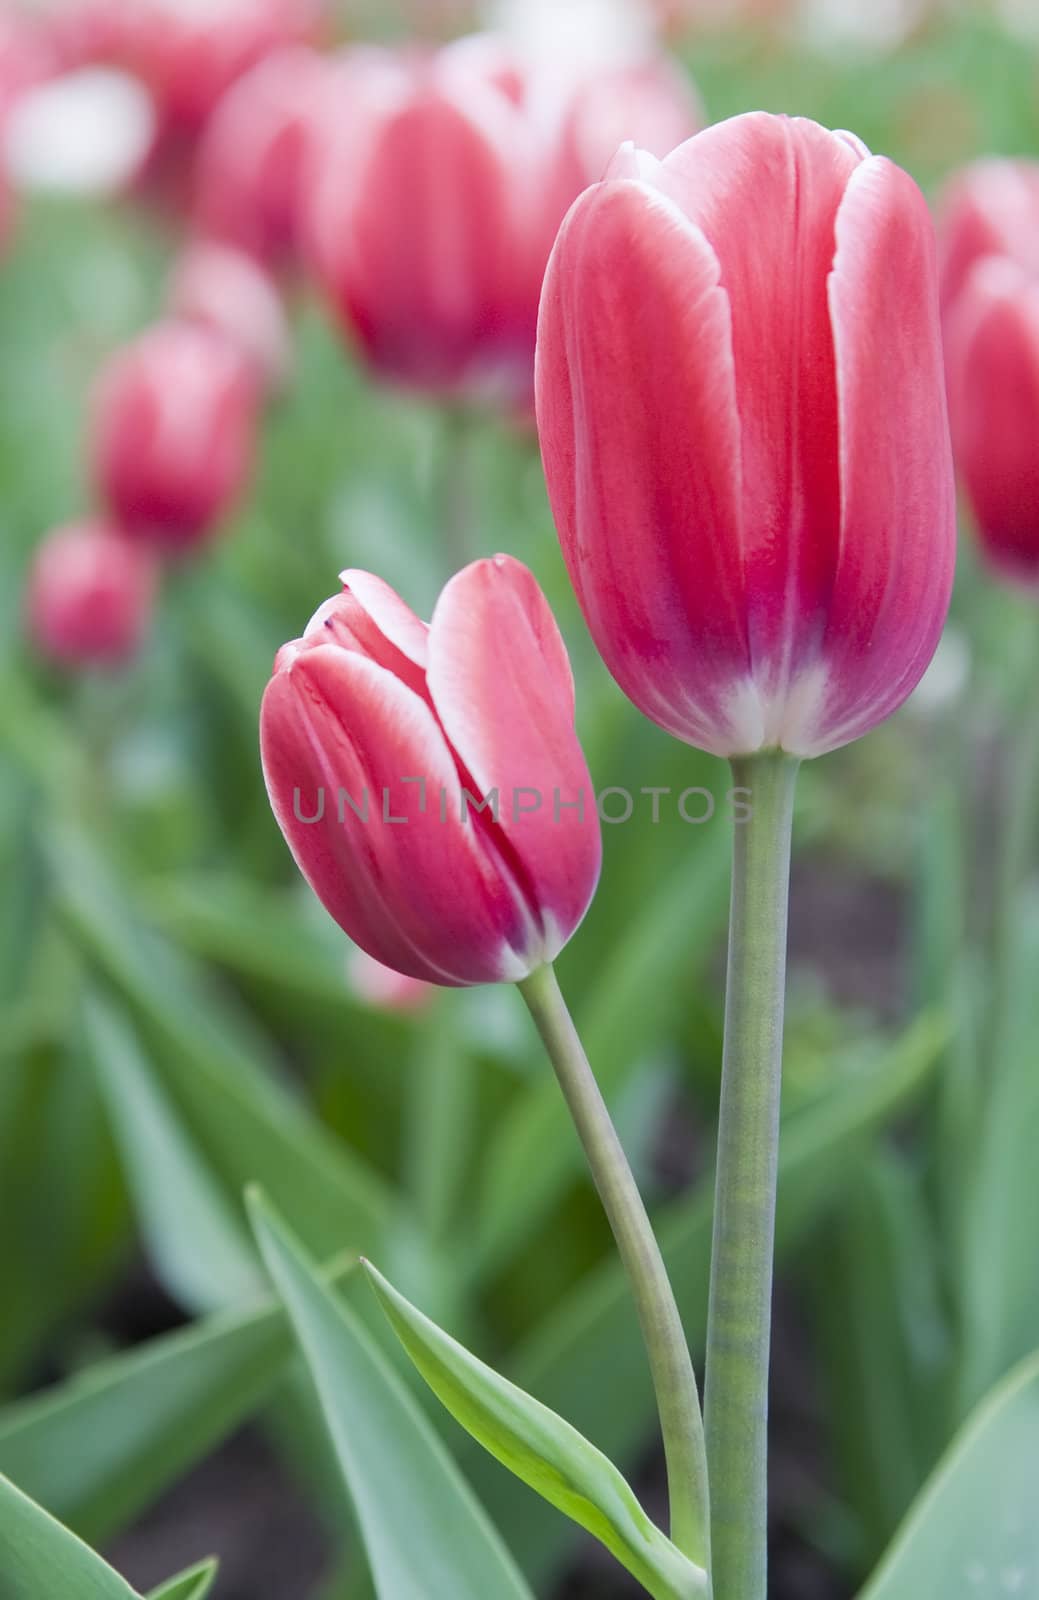 Close up image of pink tulips. Selective focus